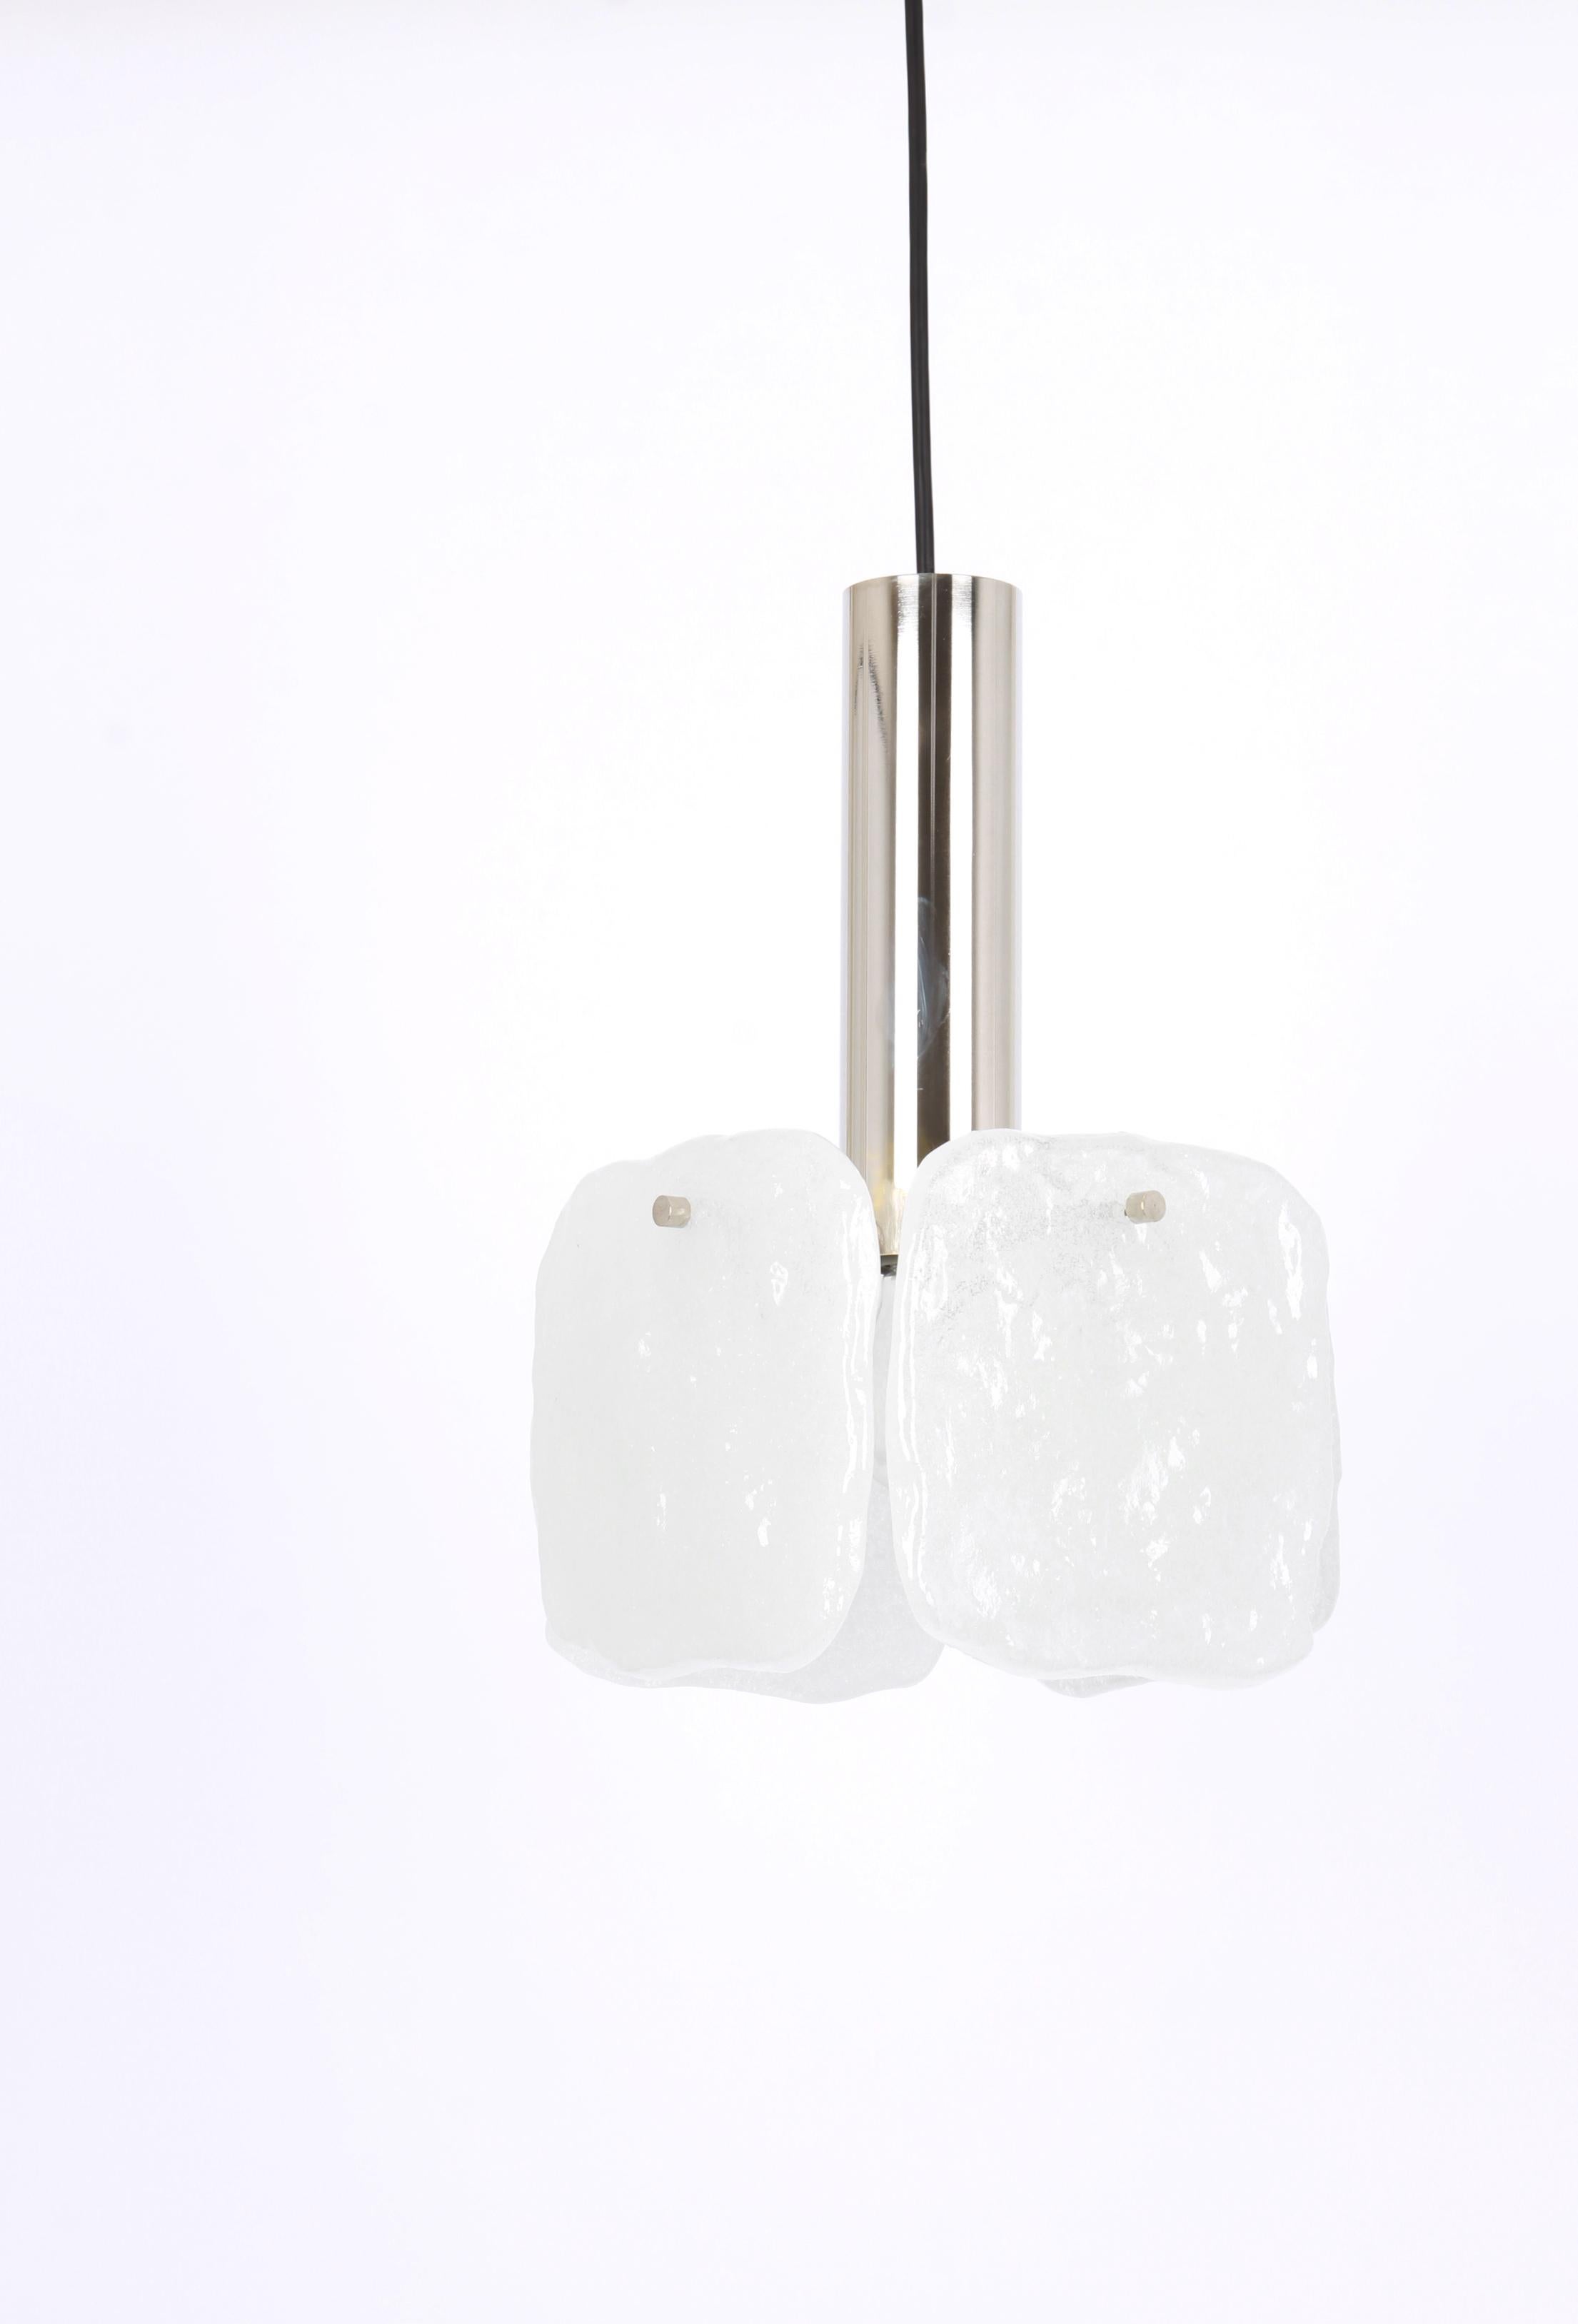 1 of 2 petite glass pendant lights
Heavy quality and in very good condition. Cleaned, well-wired and ready to use. Each Pendant requires one E27 Standard bulb with 60W max and compatible with the US/UK/ etc .. standards

The total height can be